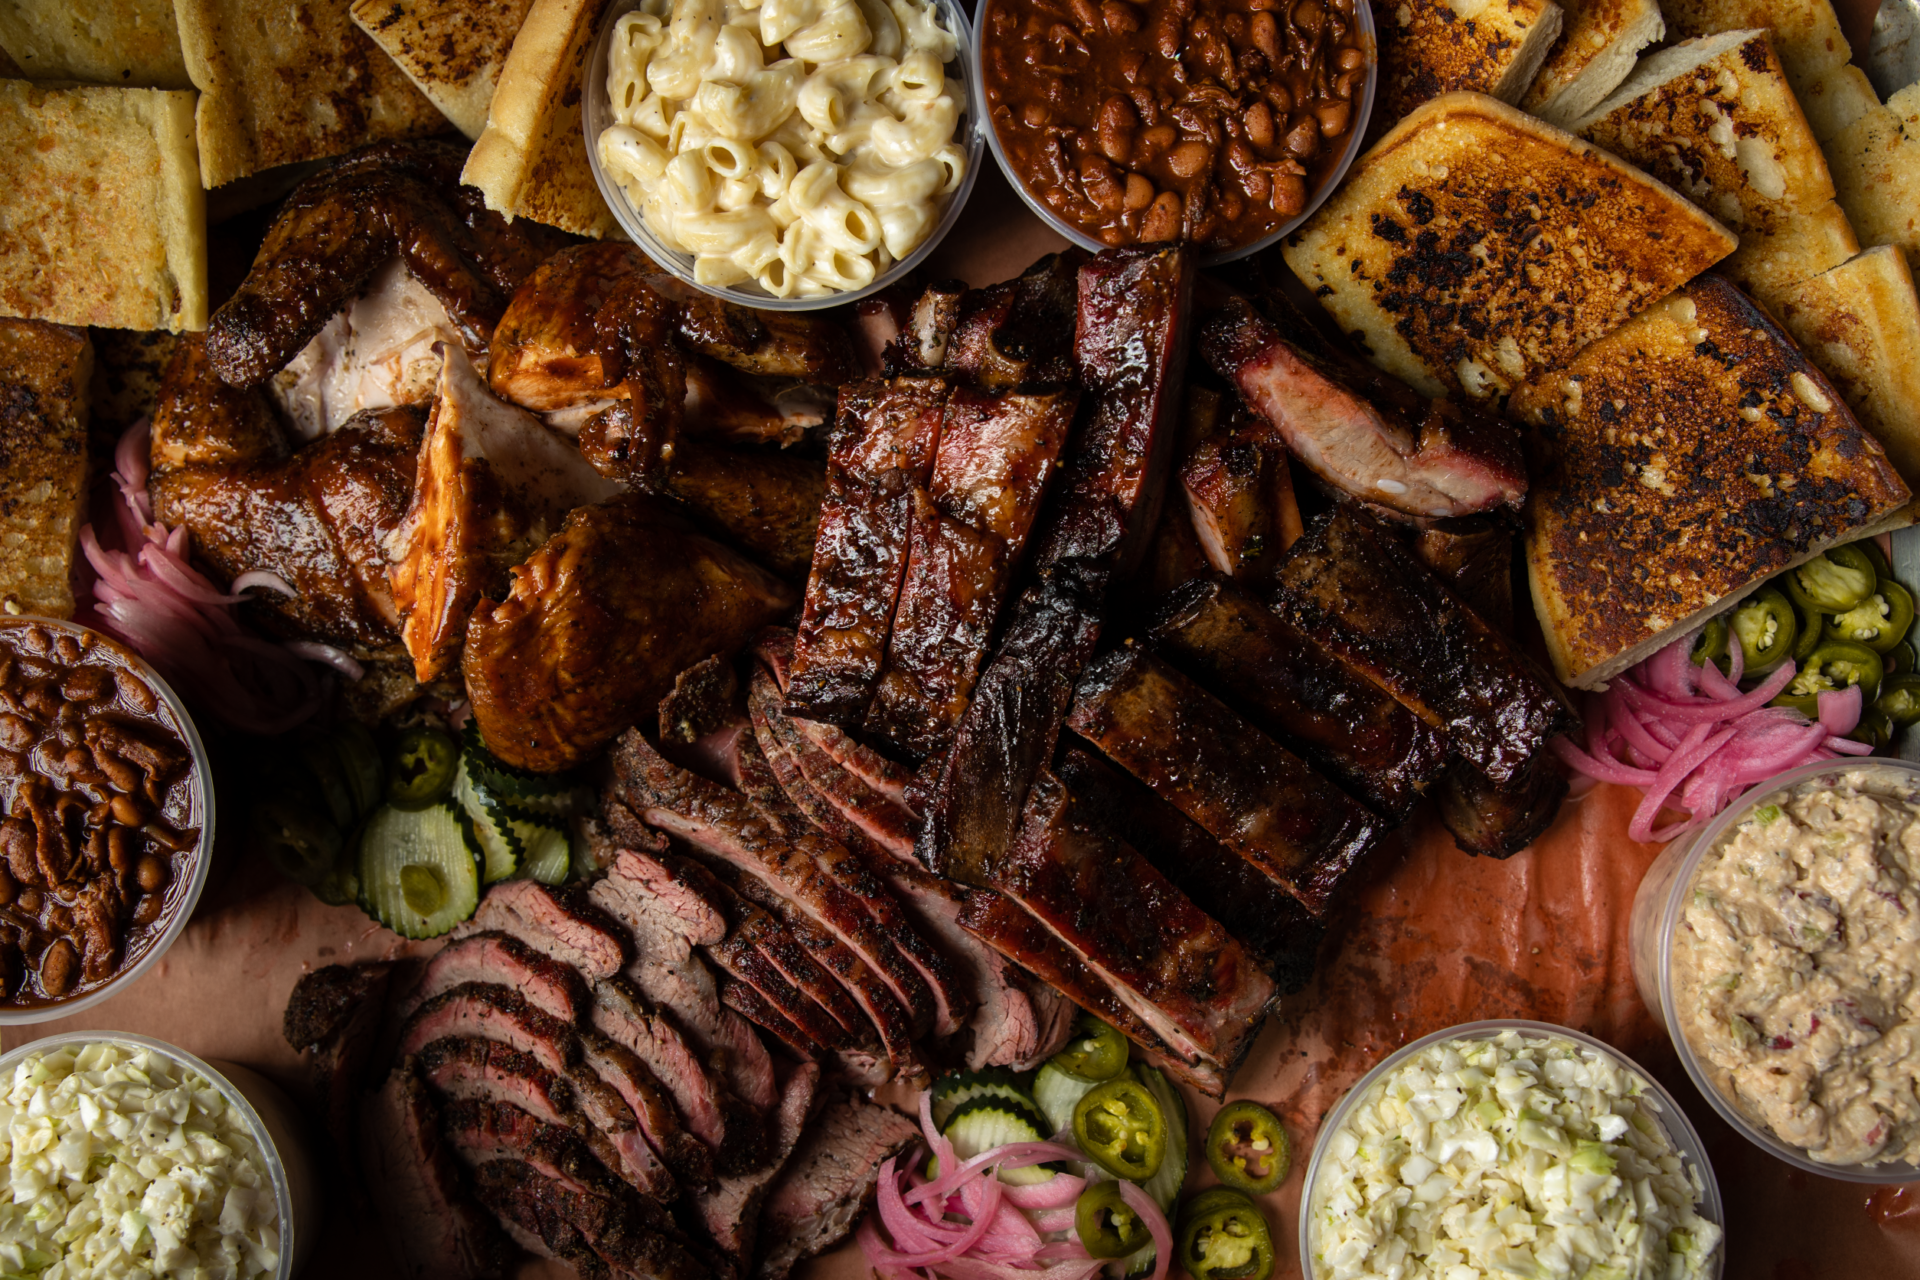 BBQ spread of ribs, chicken, tri-tip and smoked meats